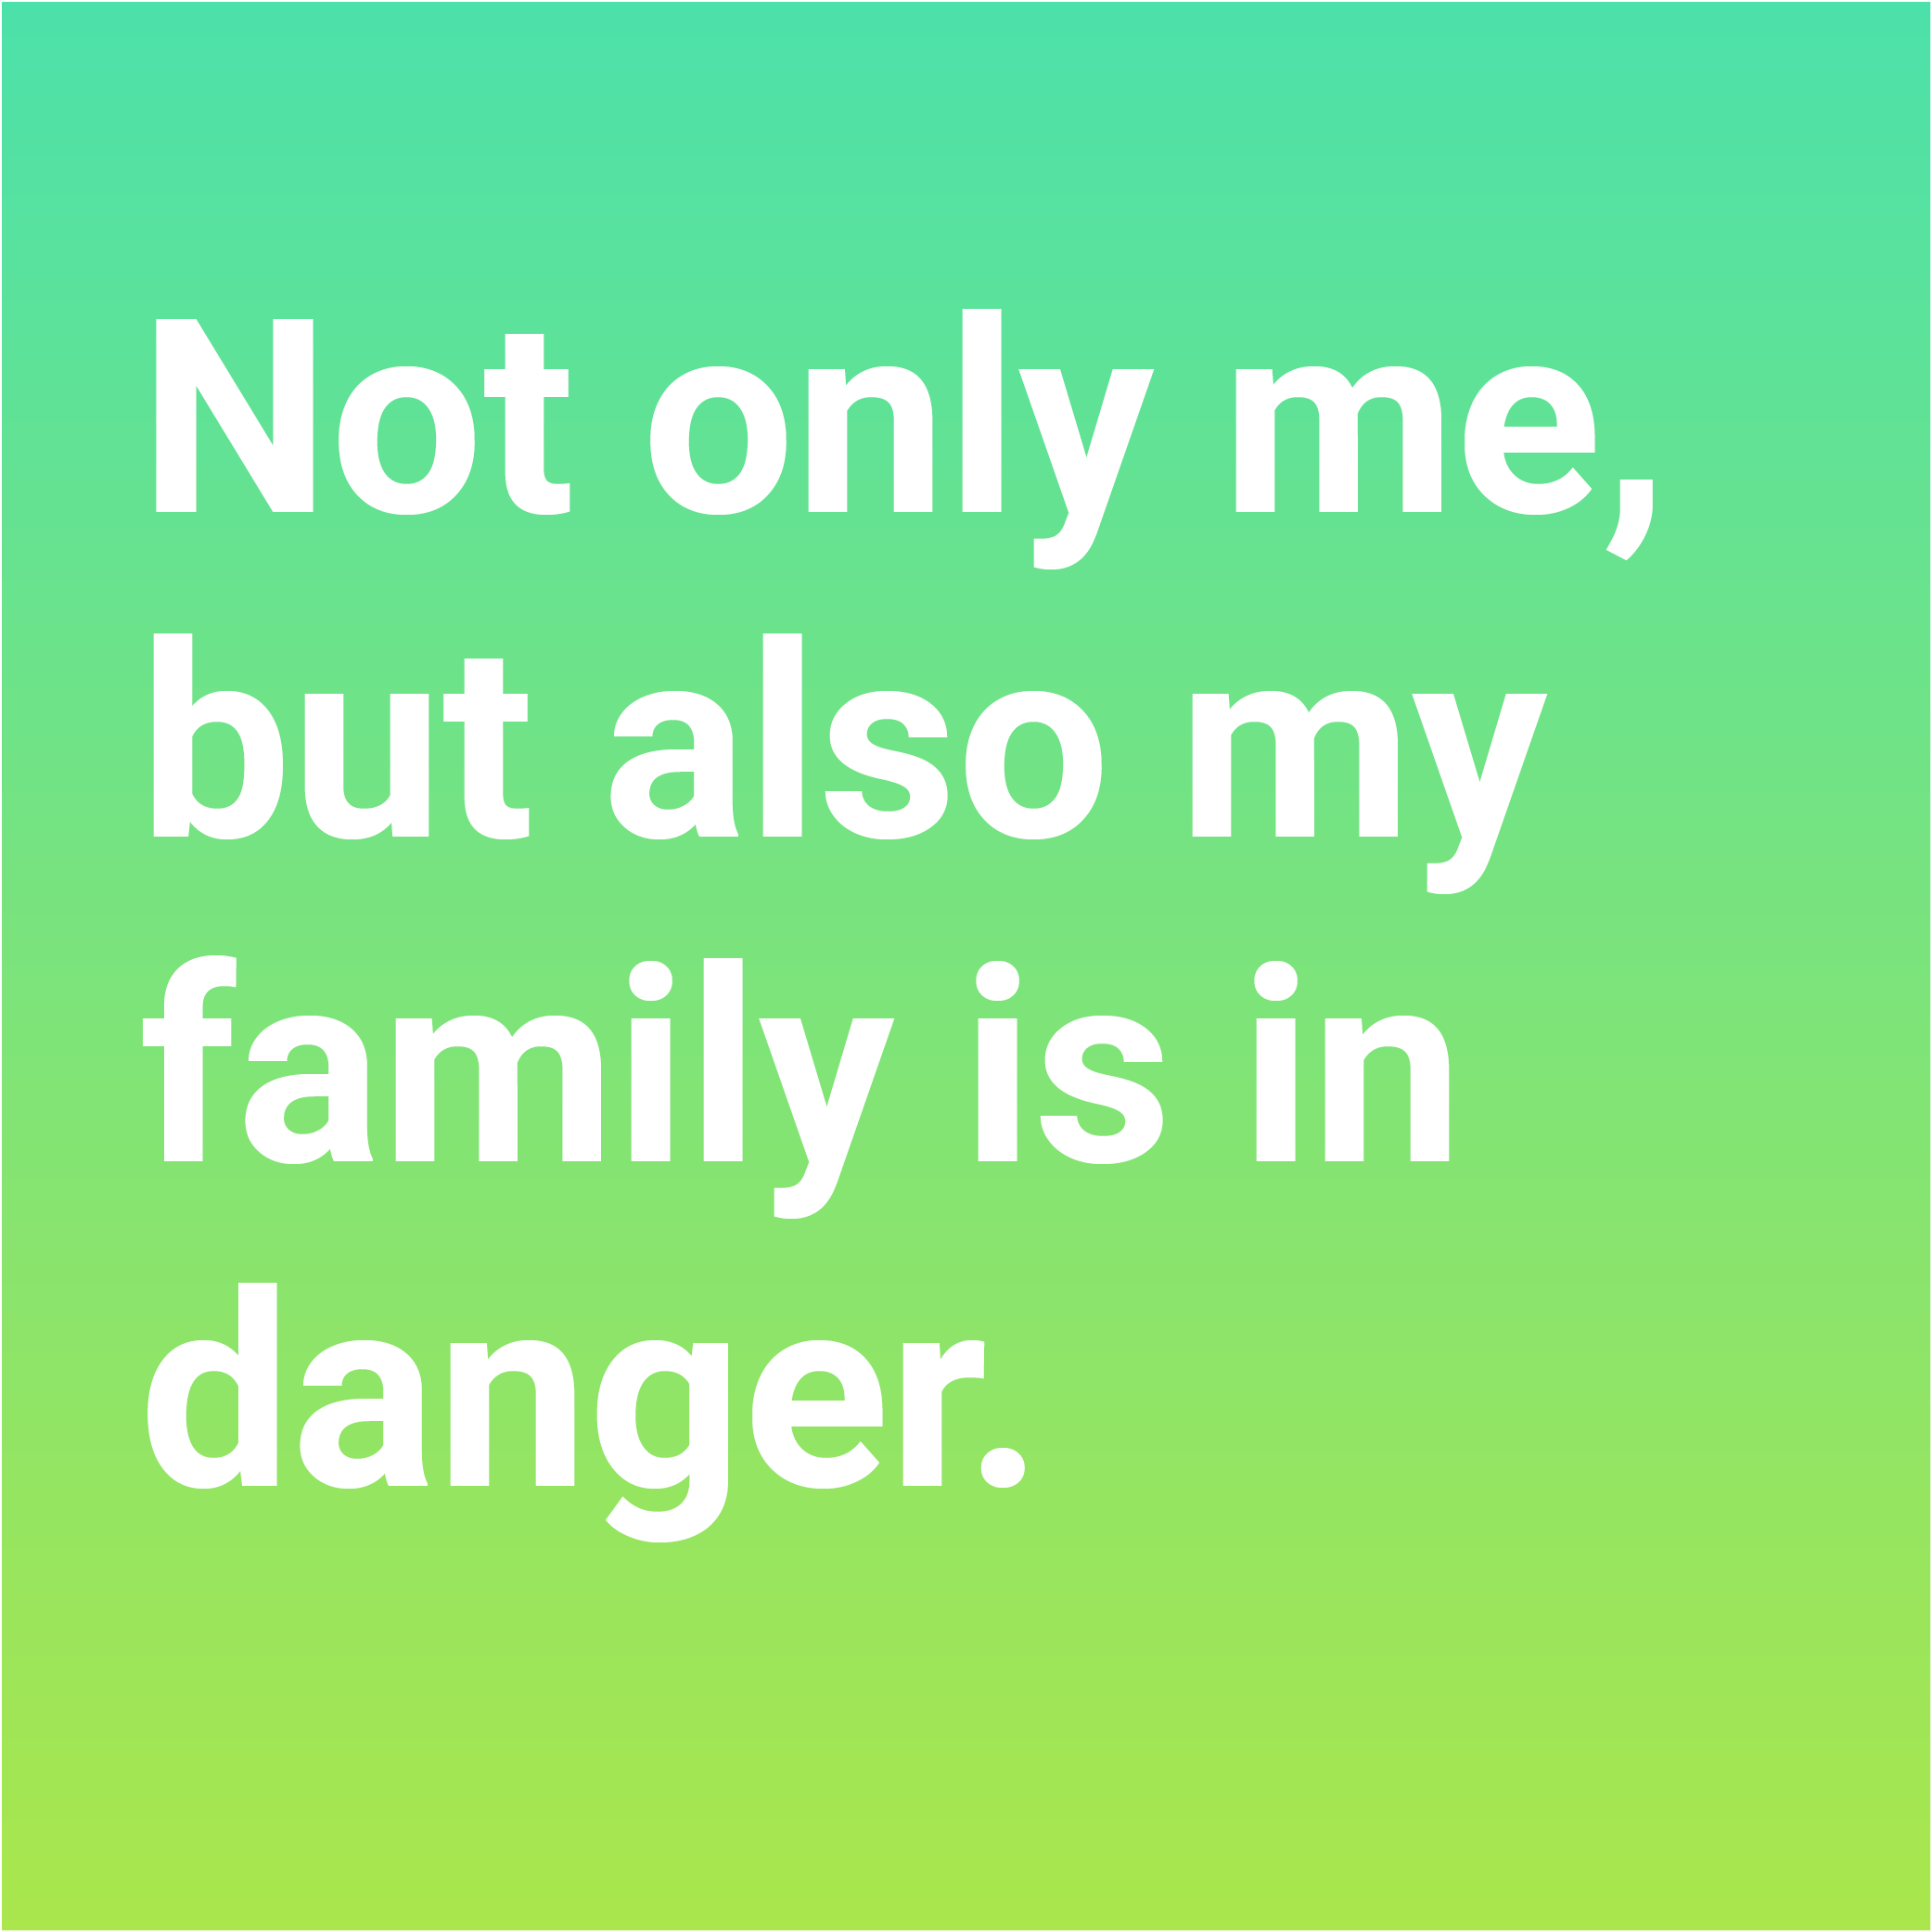 Green background and the white text: Not only me, but also my family is in danger.